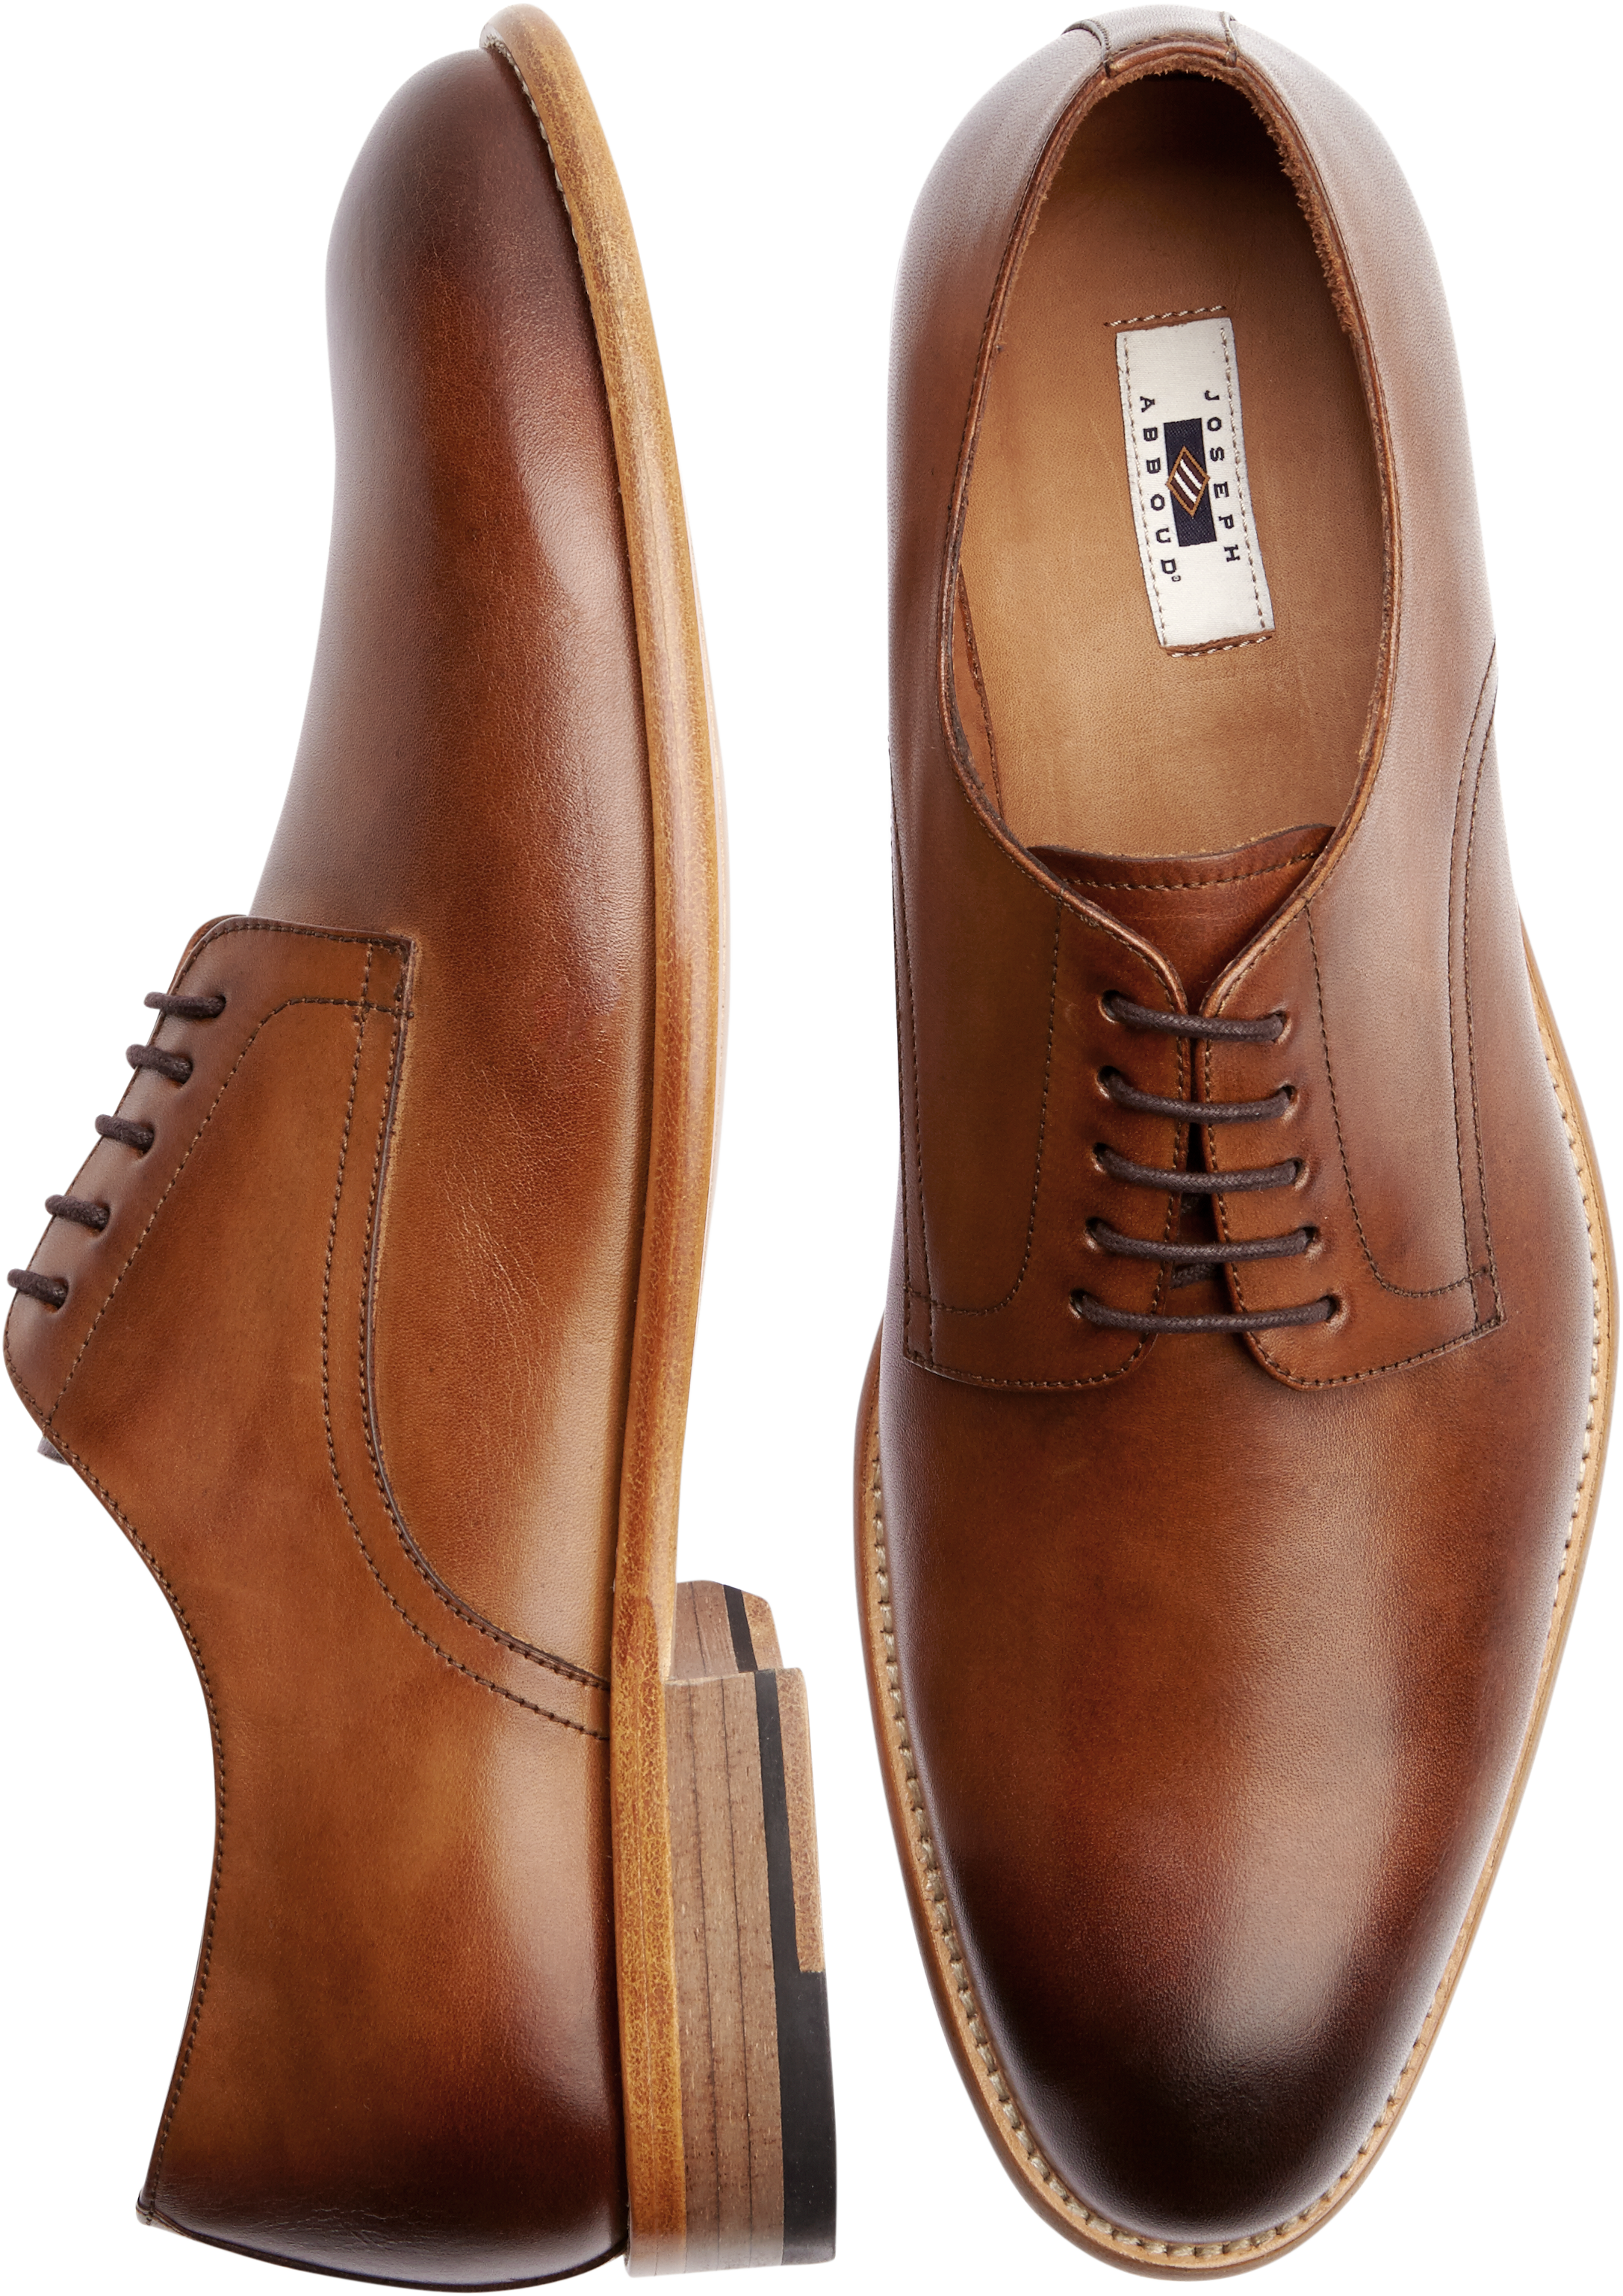 Baywood Brown Lace Up Dress Shoes - Men 